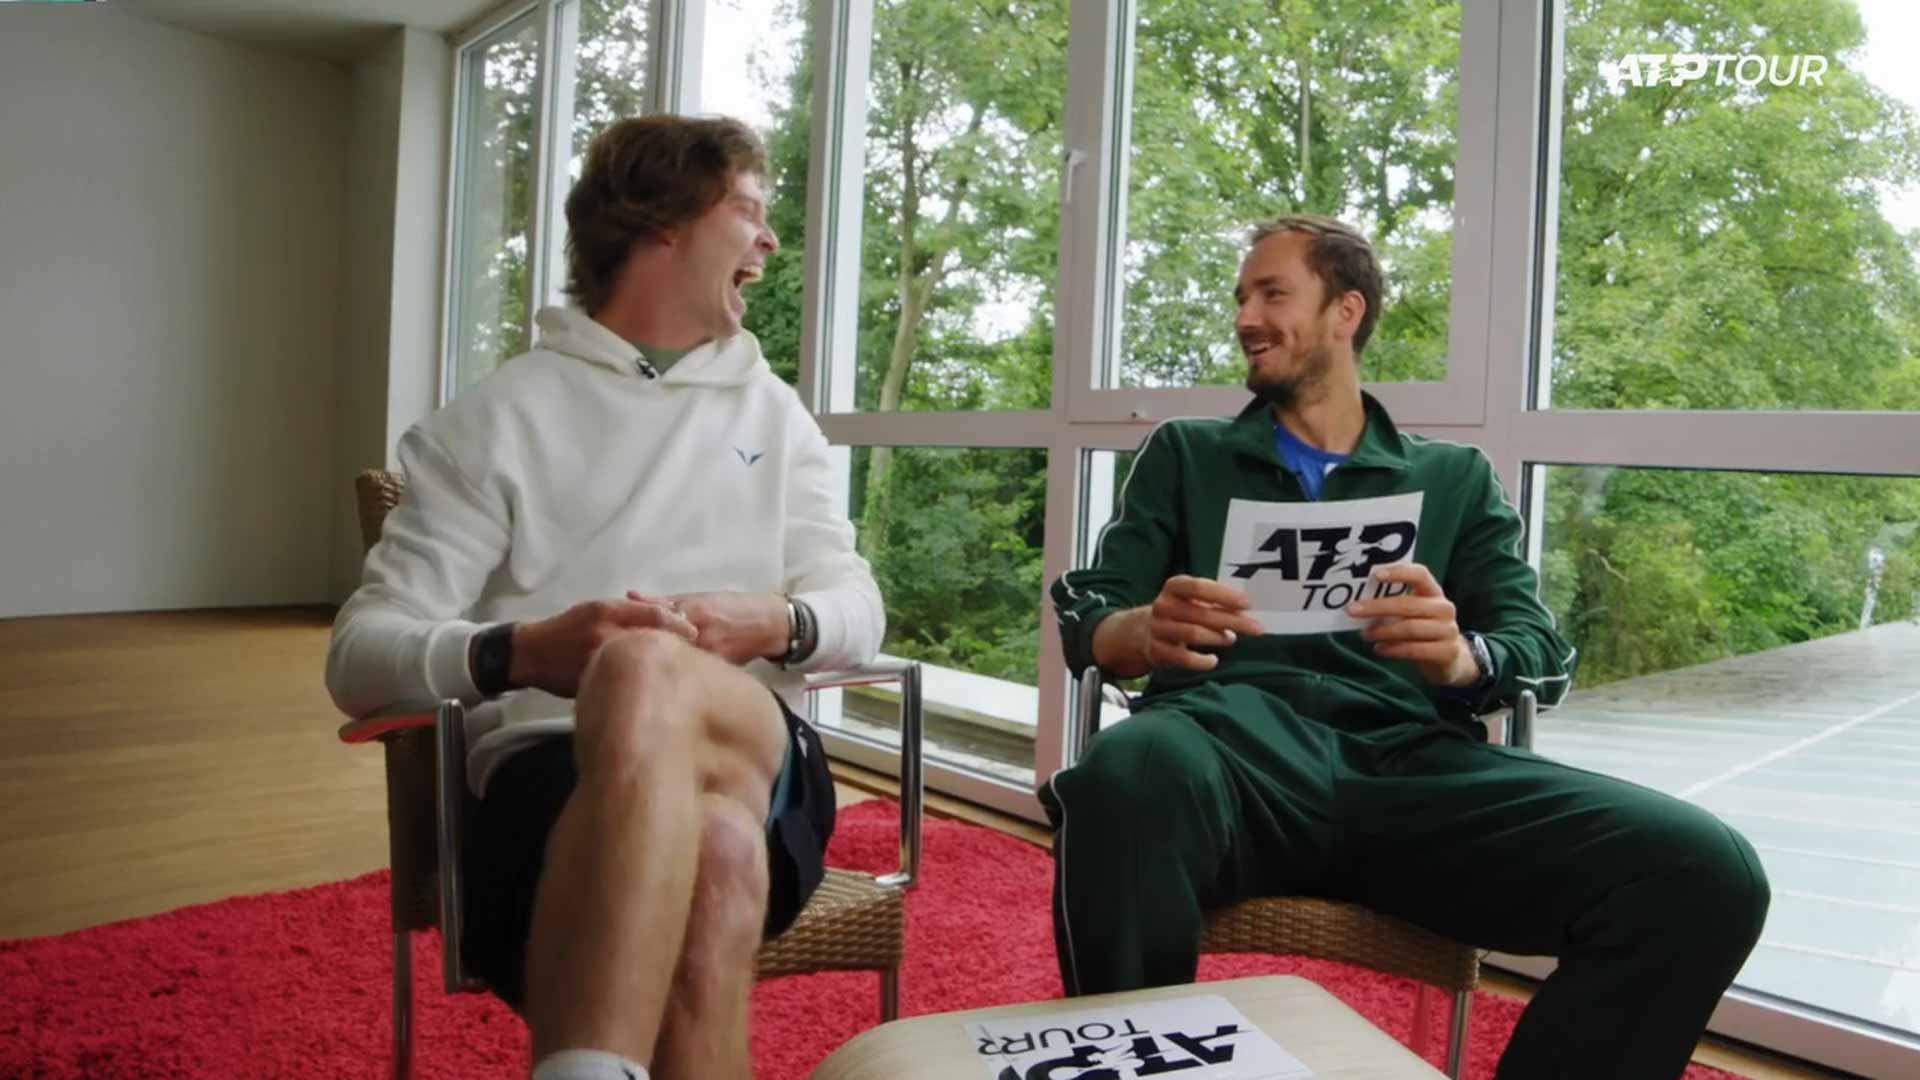 Andrey Rublev and Daniil Medvedev share their funniest moment together and much more in this 'Best Friends' feature.